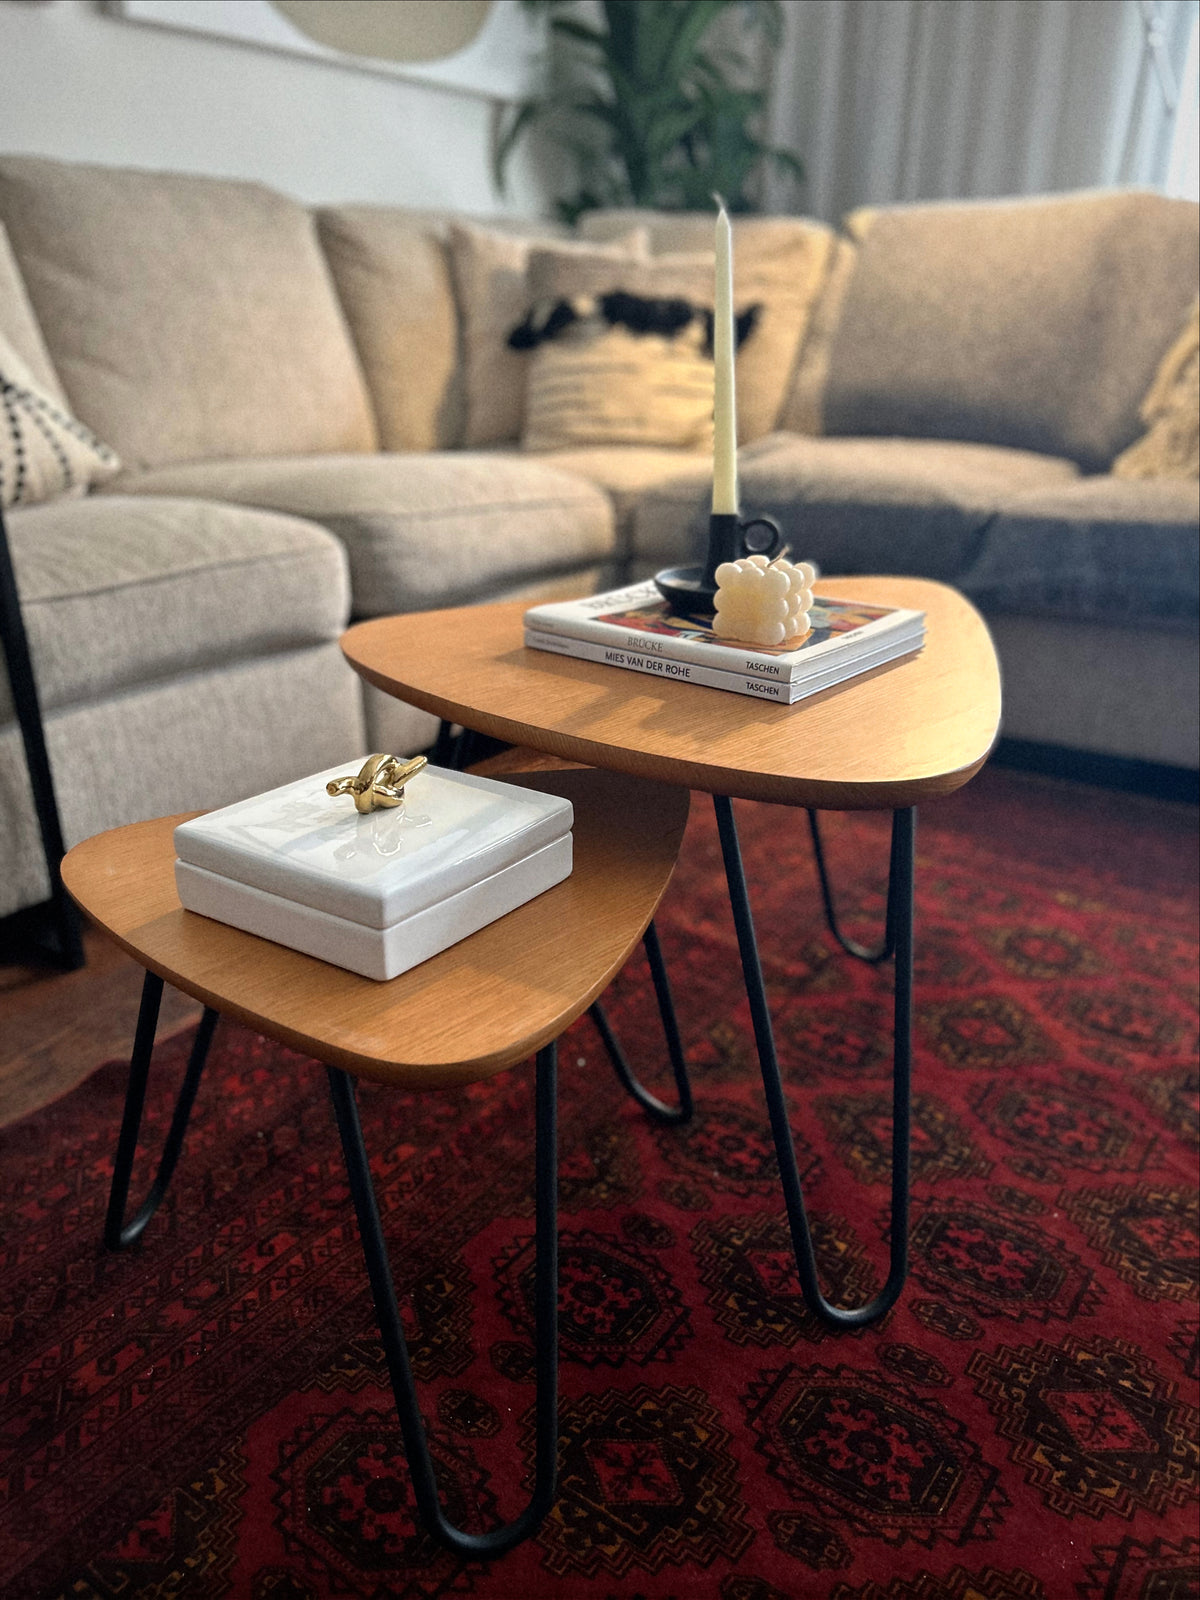 The Twins Coffee Table